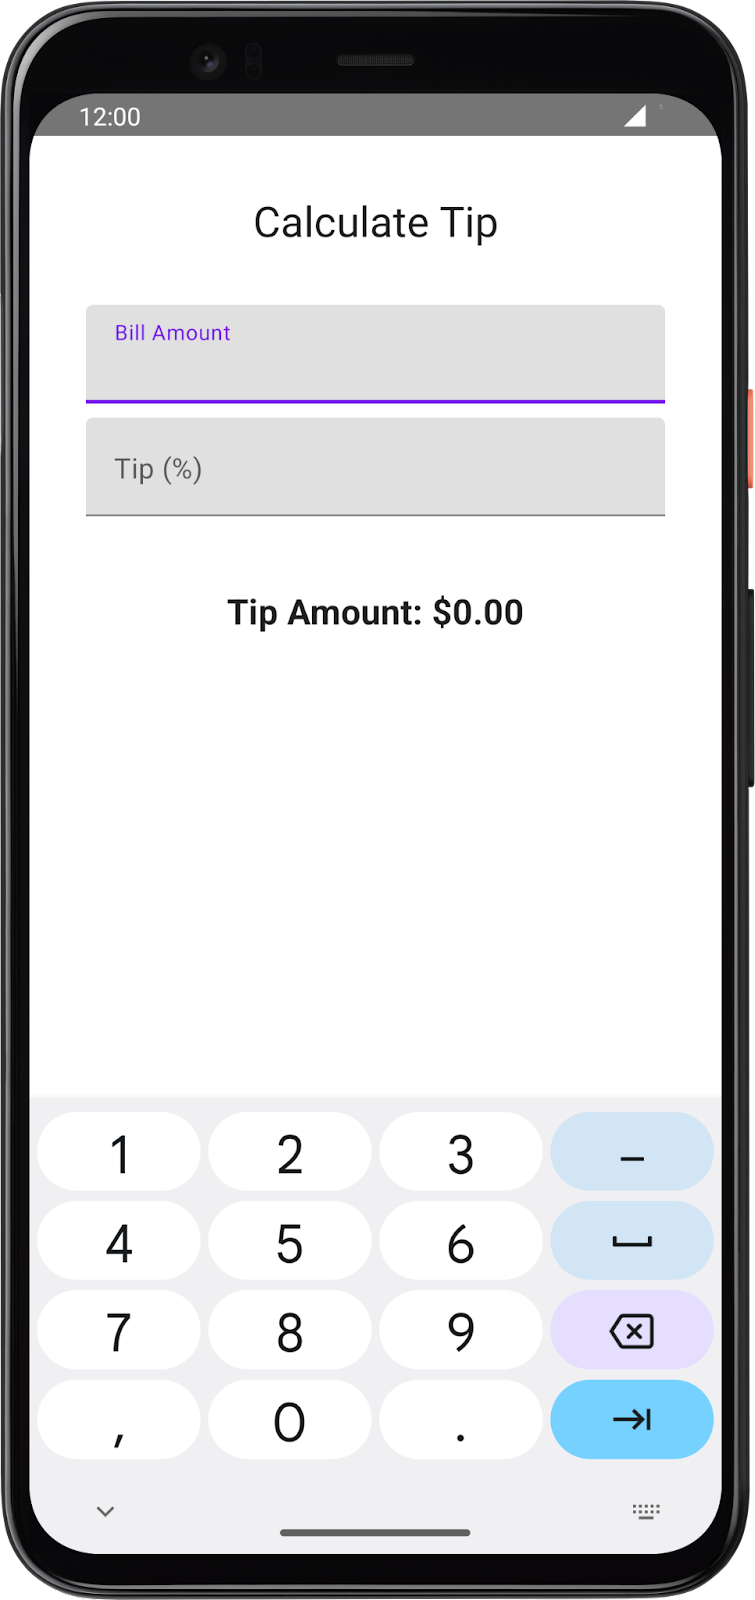 The keyboard displays the Next action button when the Bill Amount text field is selected.